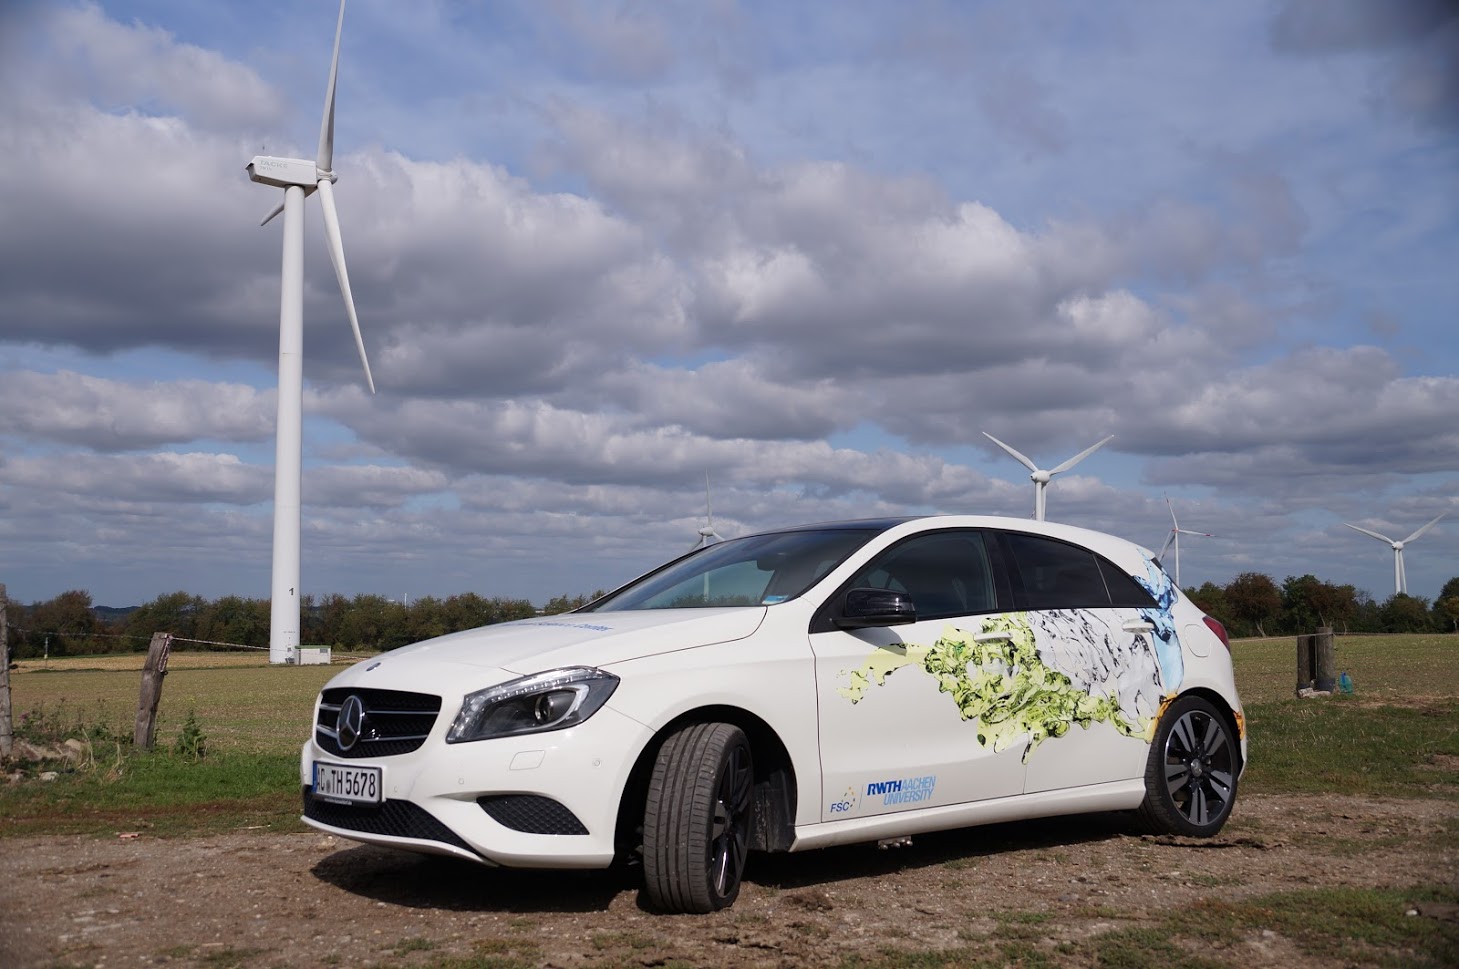 A stationary car parked in front of a field with wind turbines.